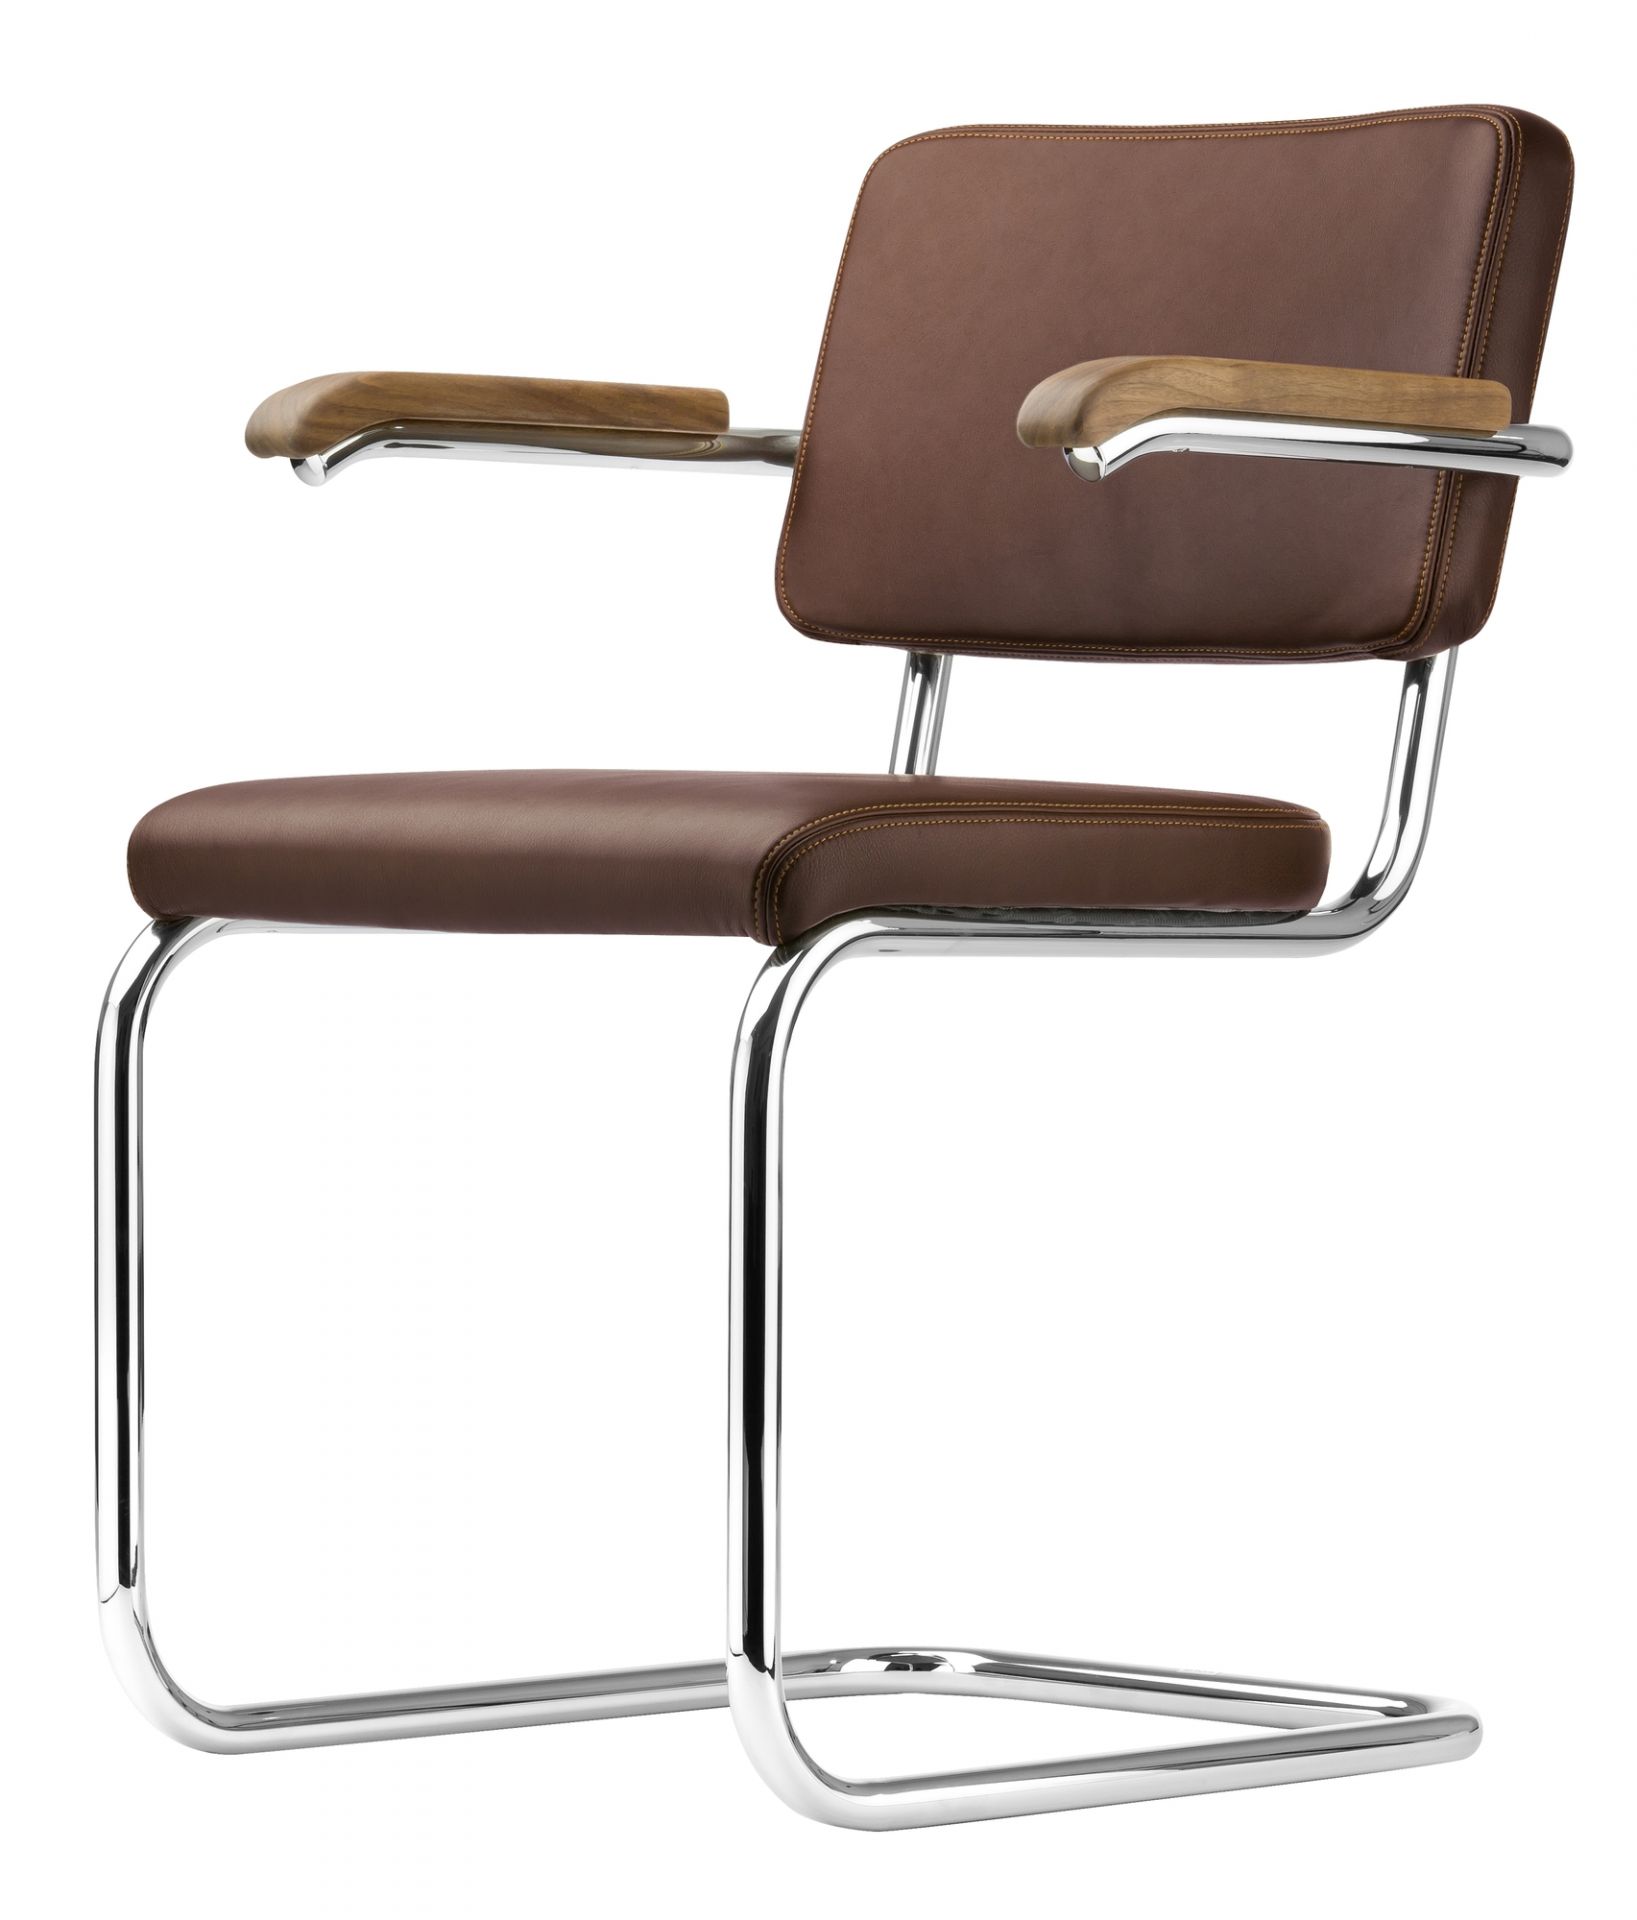 S 64 PV Tubular Steel Classic Cantilever Thonet